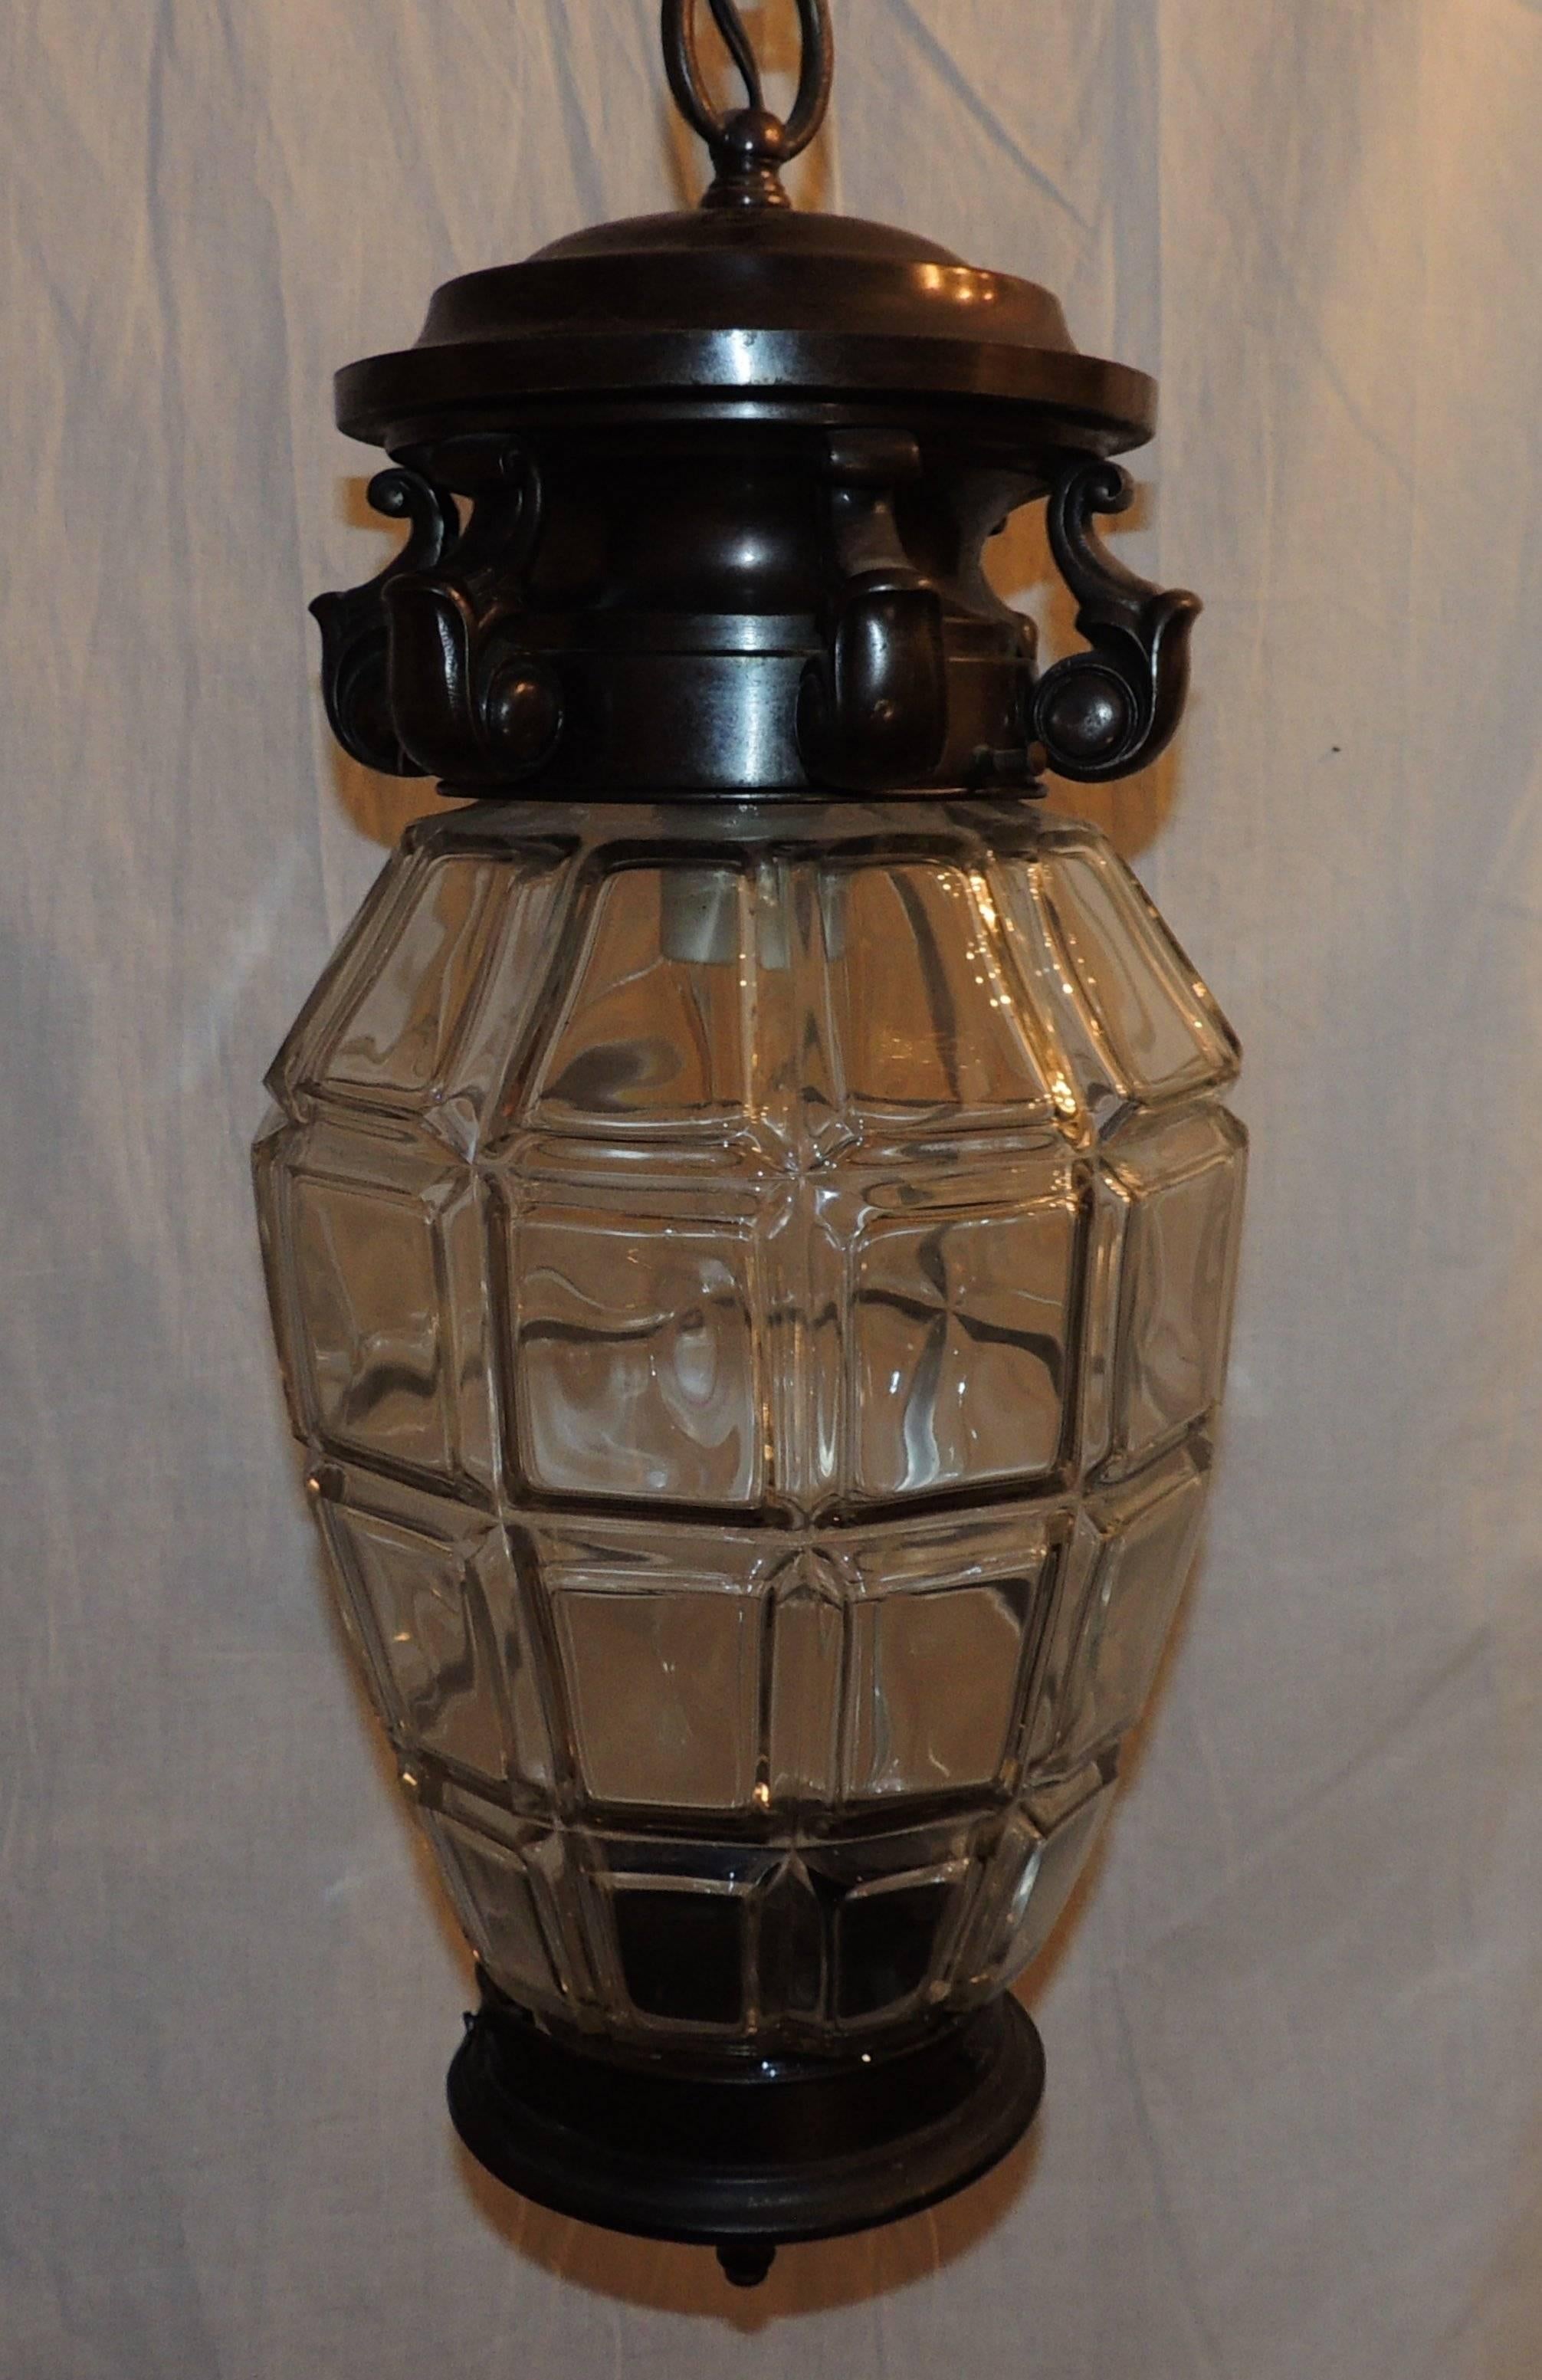 Handsome vintage beveled Panel glass and French bronze lantern with single light Pendent Fixture

Measures: 20